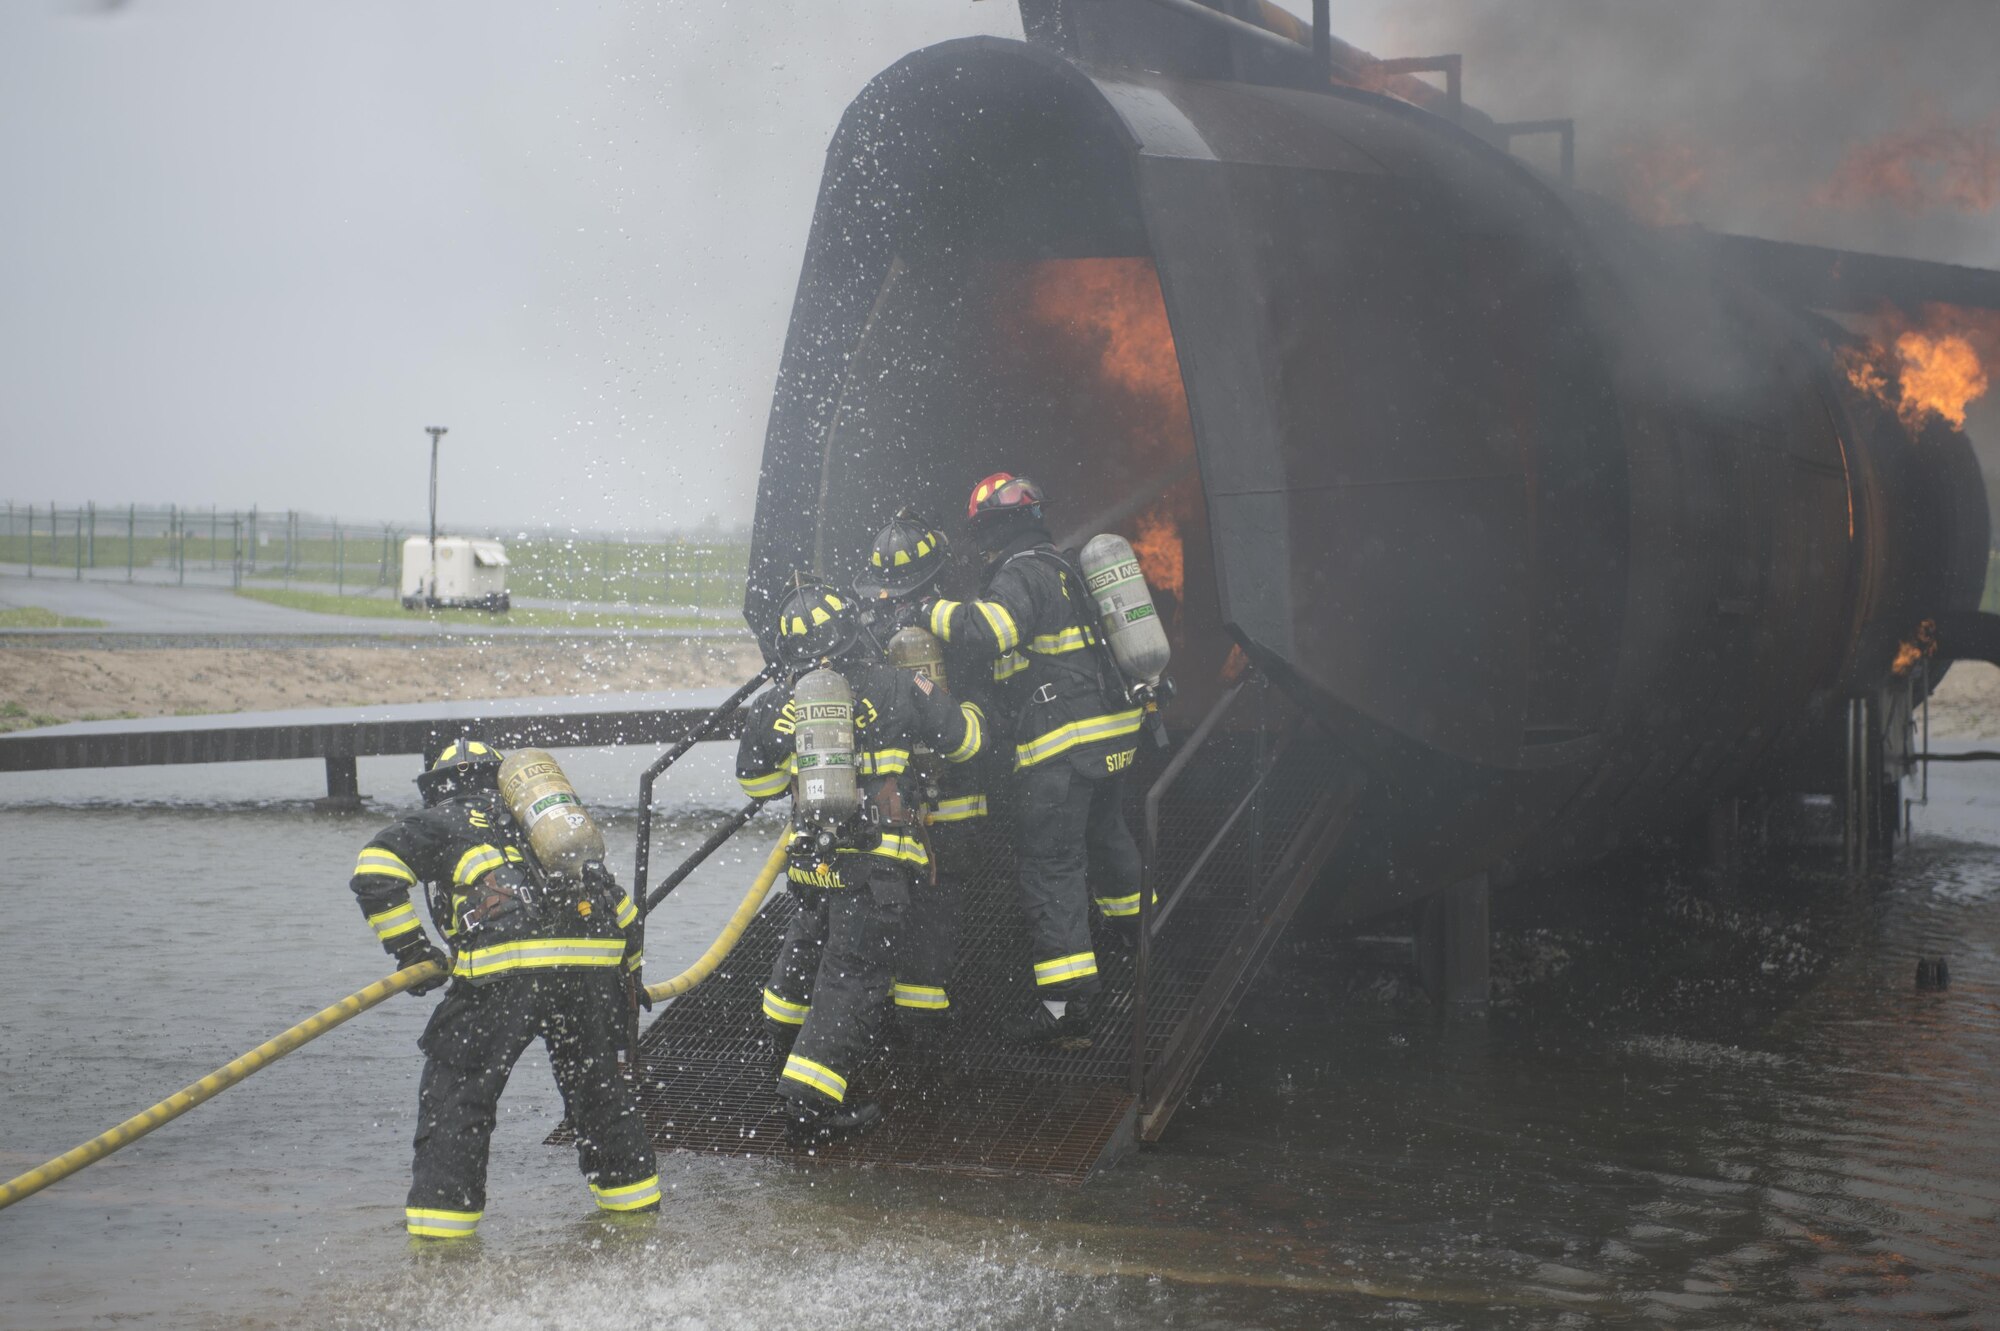 Airmen with the 512th Airlift Wing train fire-fighting skills as they extinguish an aircraft fire at Dover Air Force Base, Del., April 23, 2016. This training occurs twice a year to keep the fire fighters current and proficient in their training requirements. (U.S. Air Force photo by Tech. Sgt. Nathan Rivard)